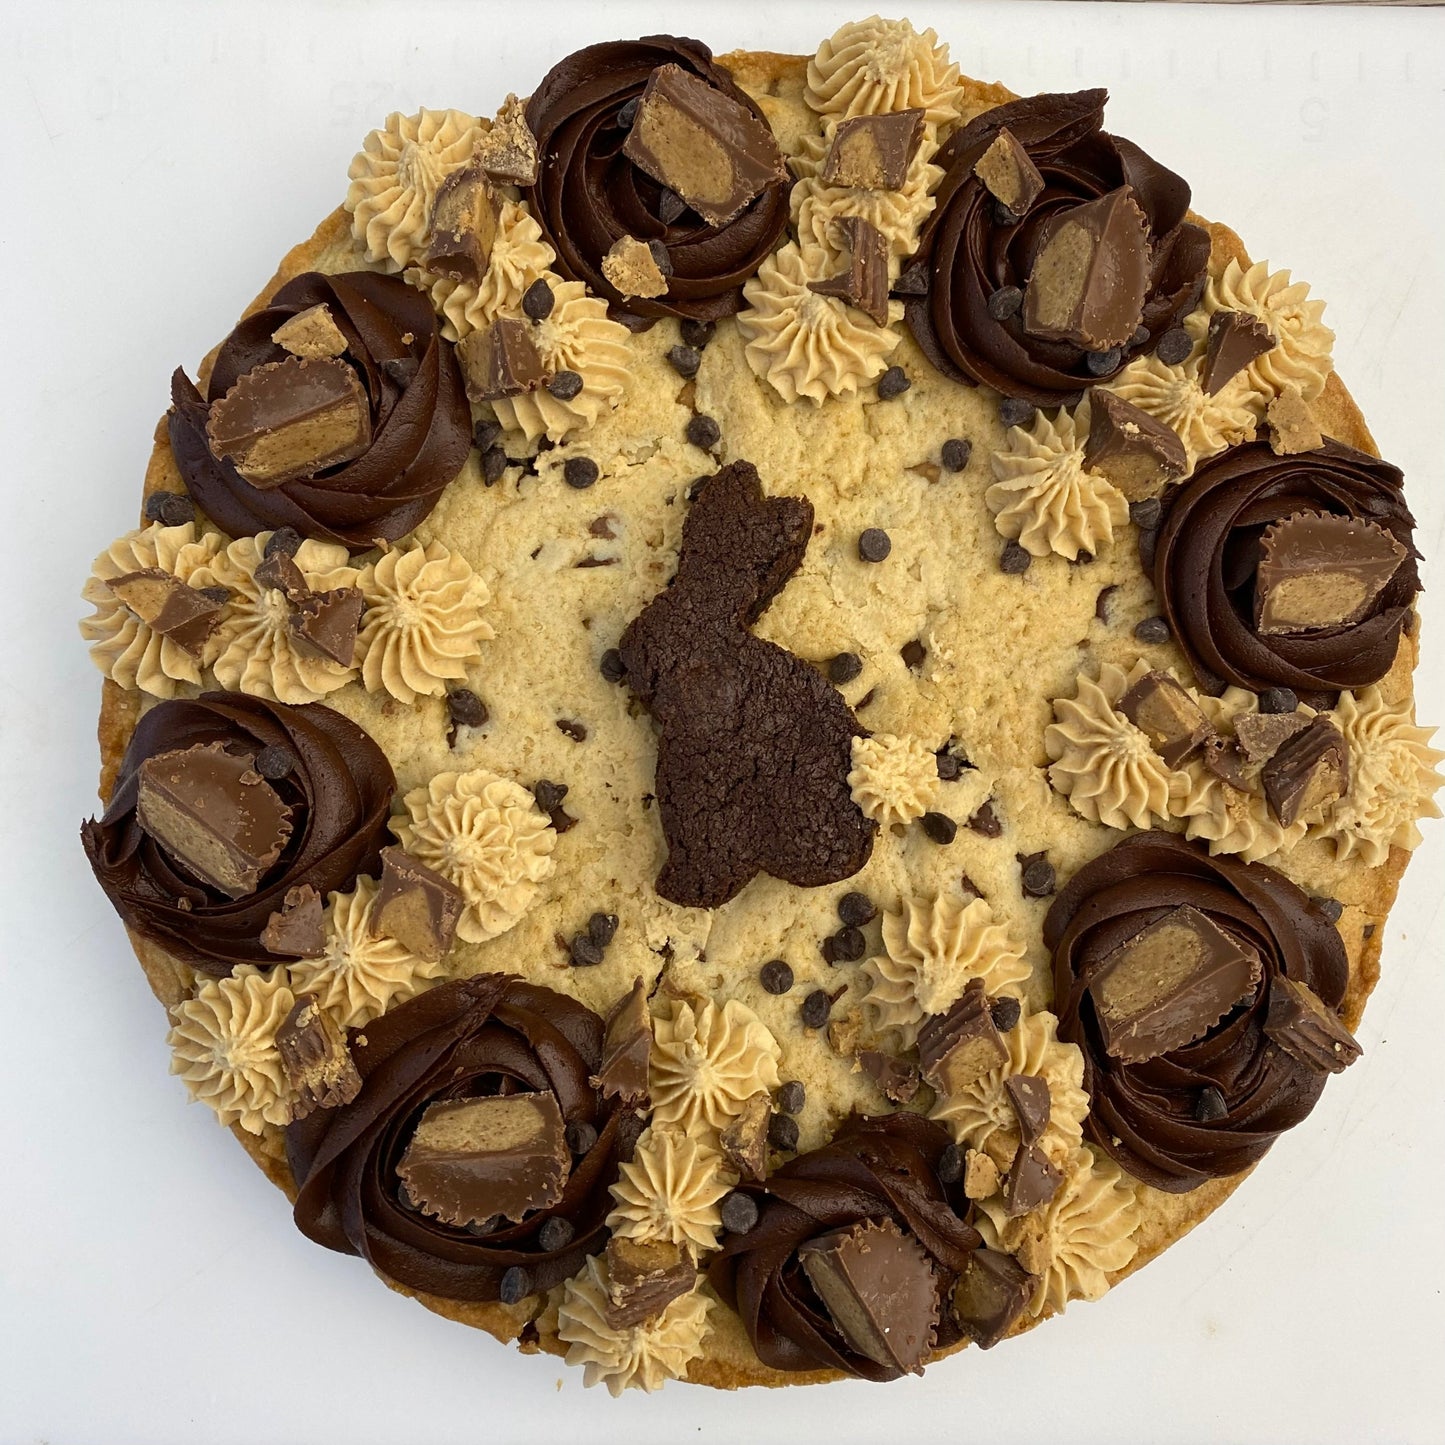 Peanut Butter Chocolate Chip Cookie Cake